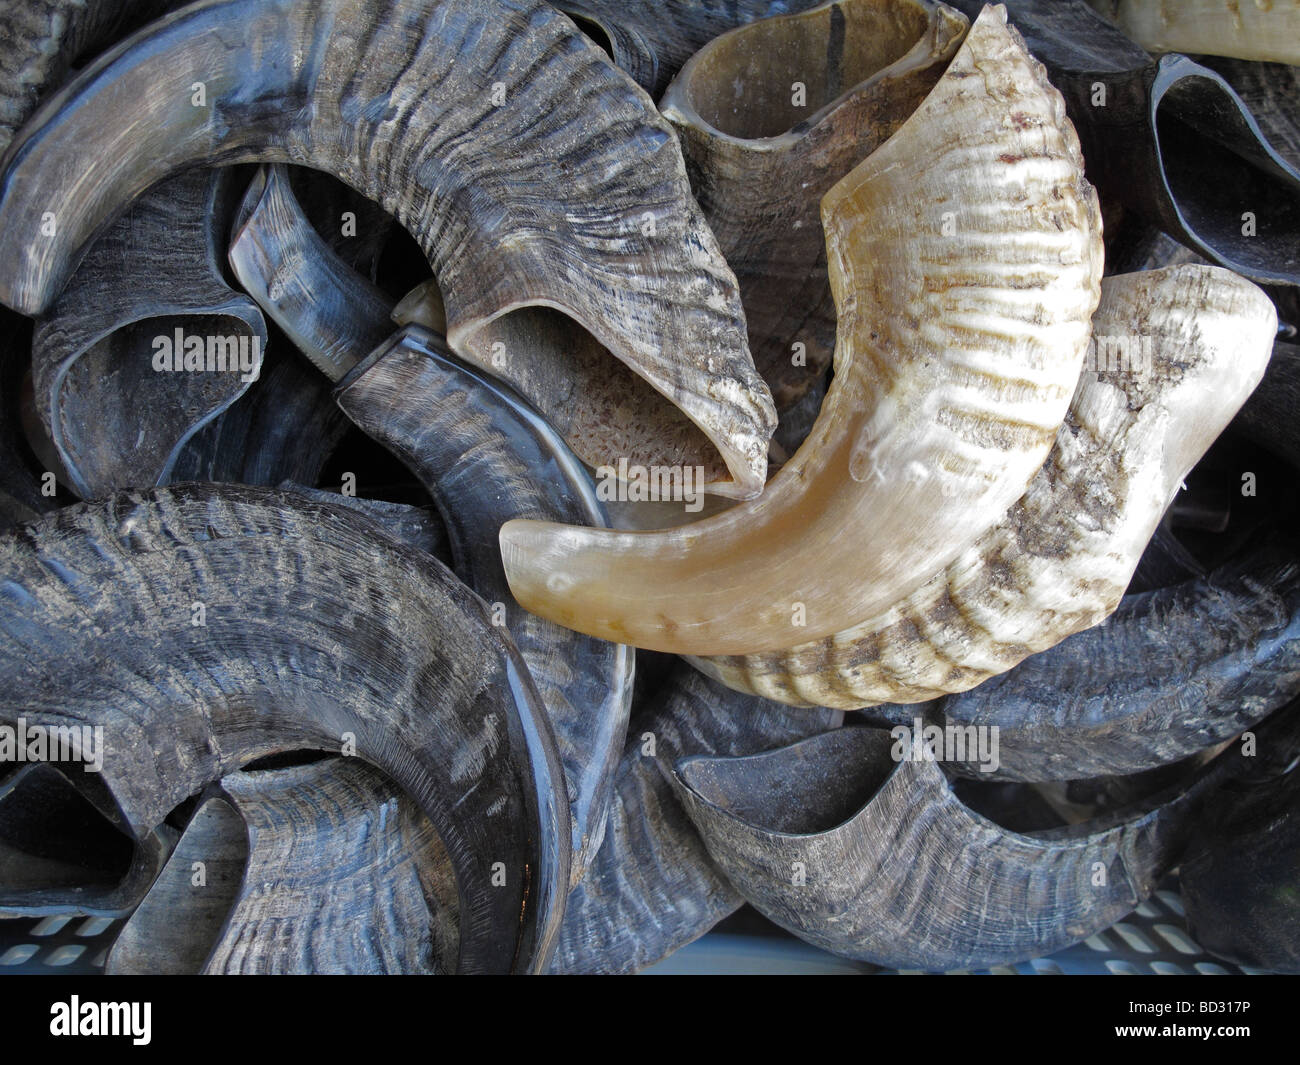 Stack of traditional Shofar which sounds during the Jewish High Holy Days on Rosh Hashanah and Yom Kippur Stock Photo